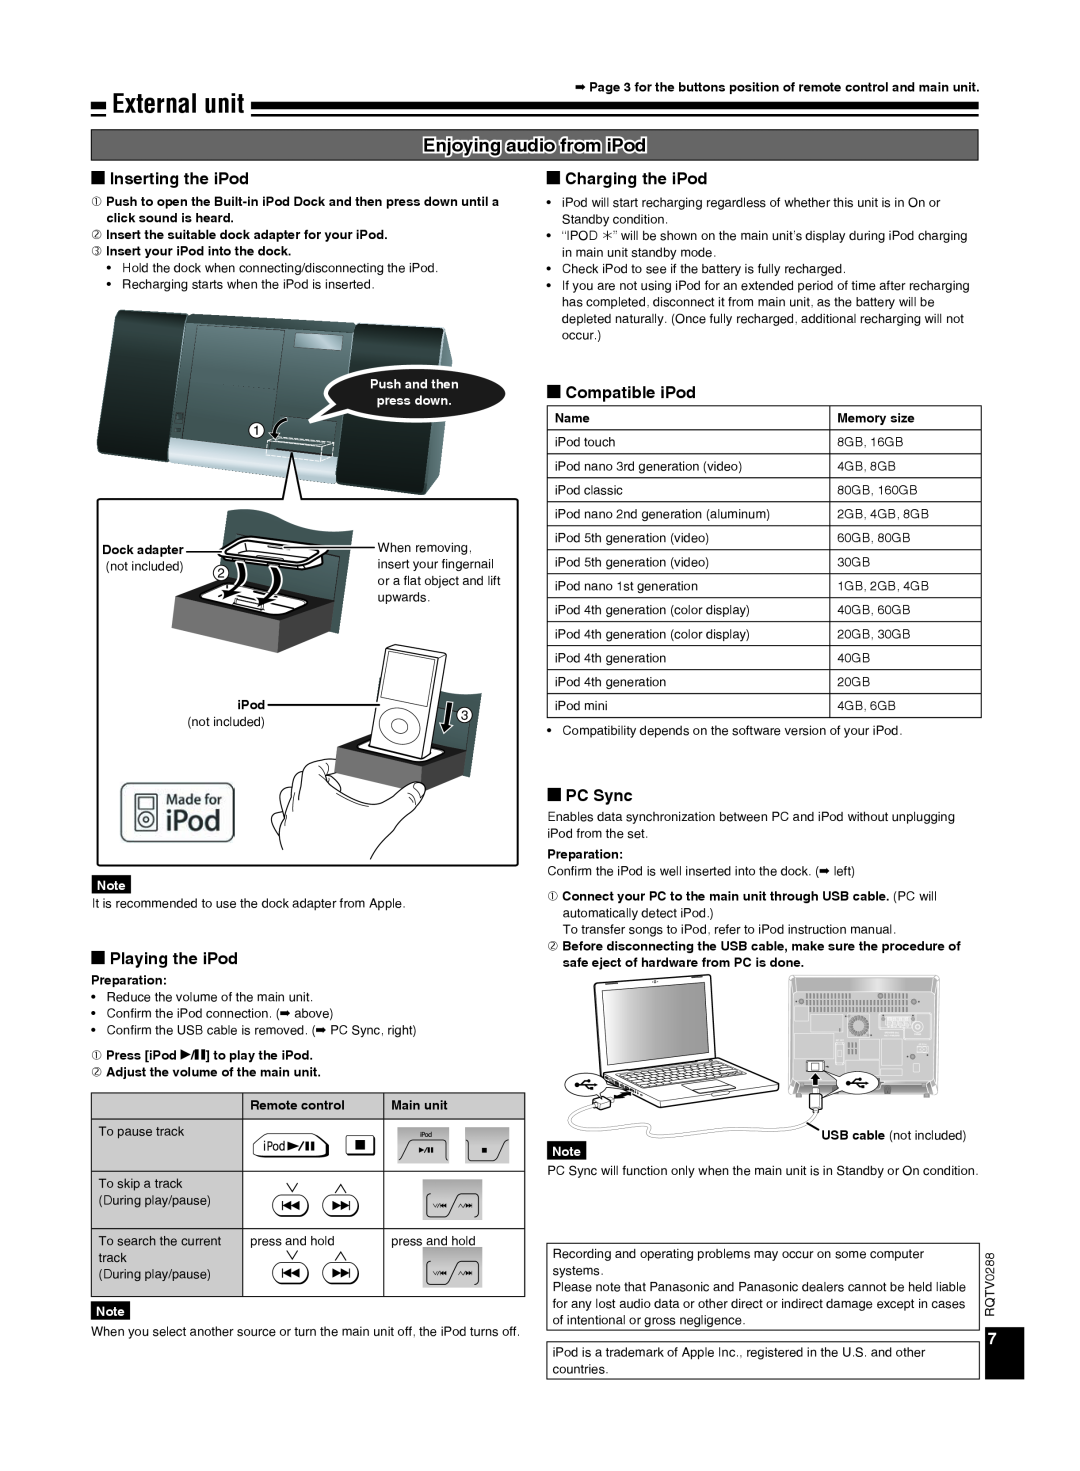 Panasonic SCEN38 important safety instructions External unit, Enjoying audio from iPod, Push and then press down 